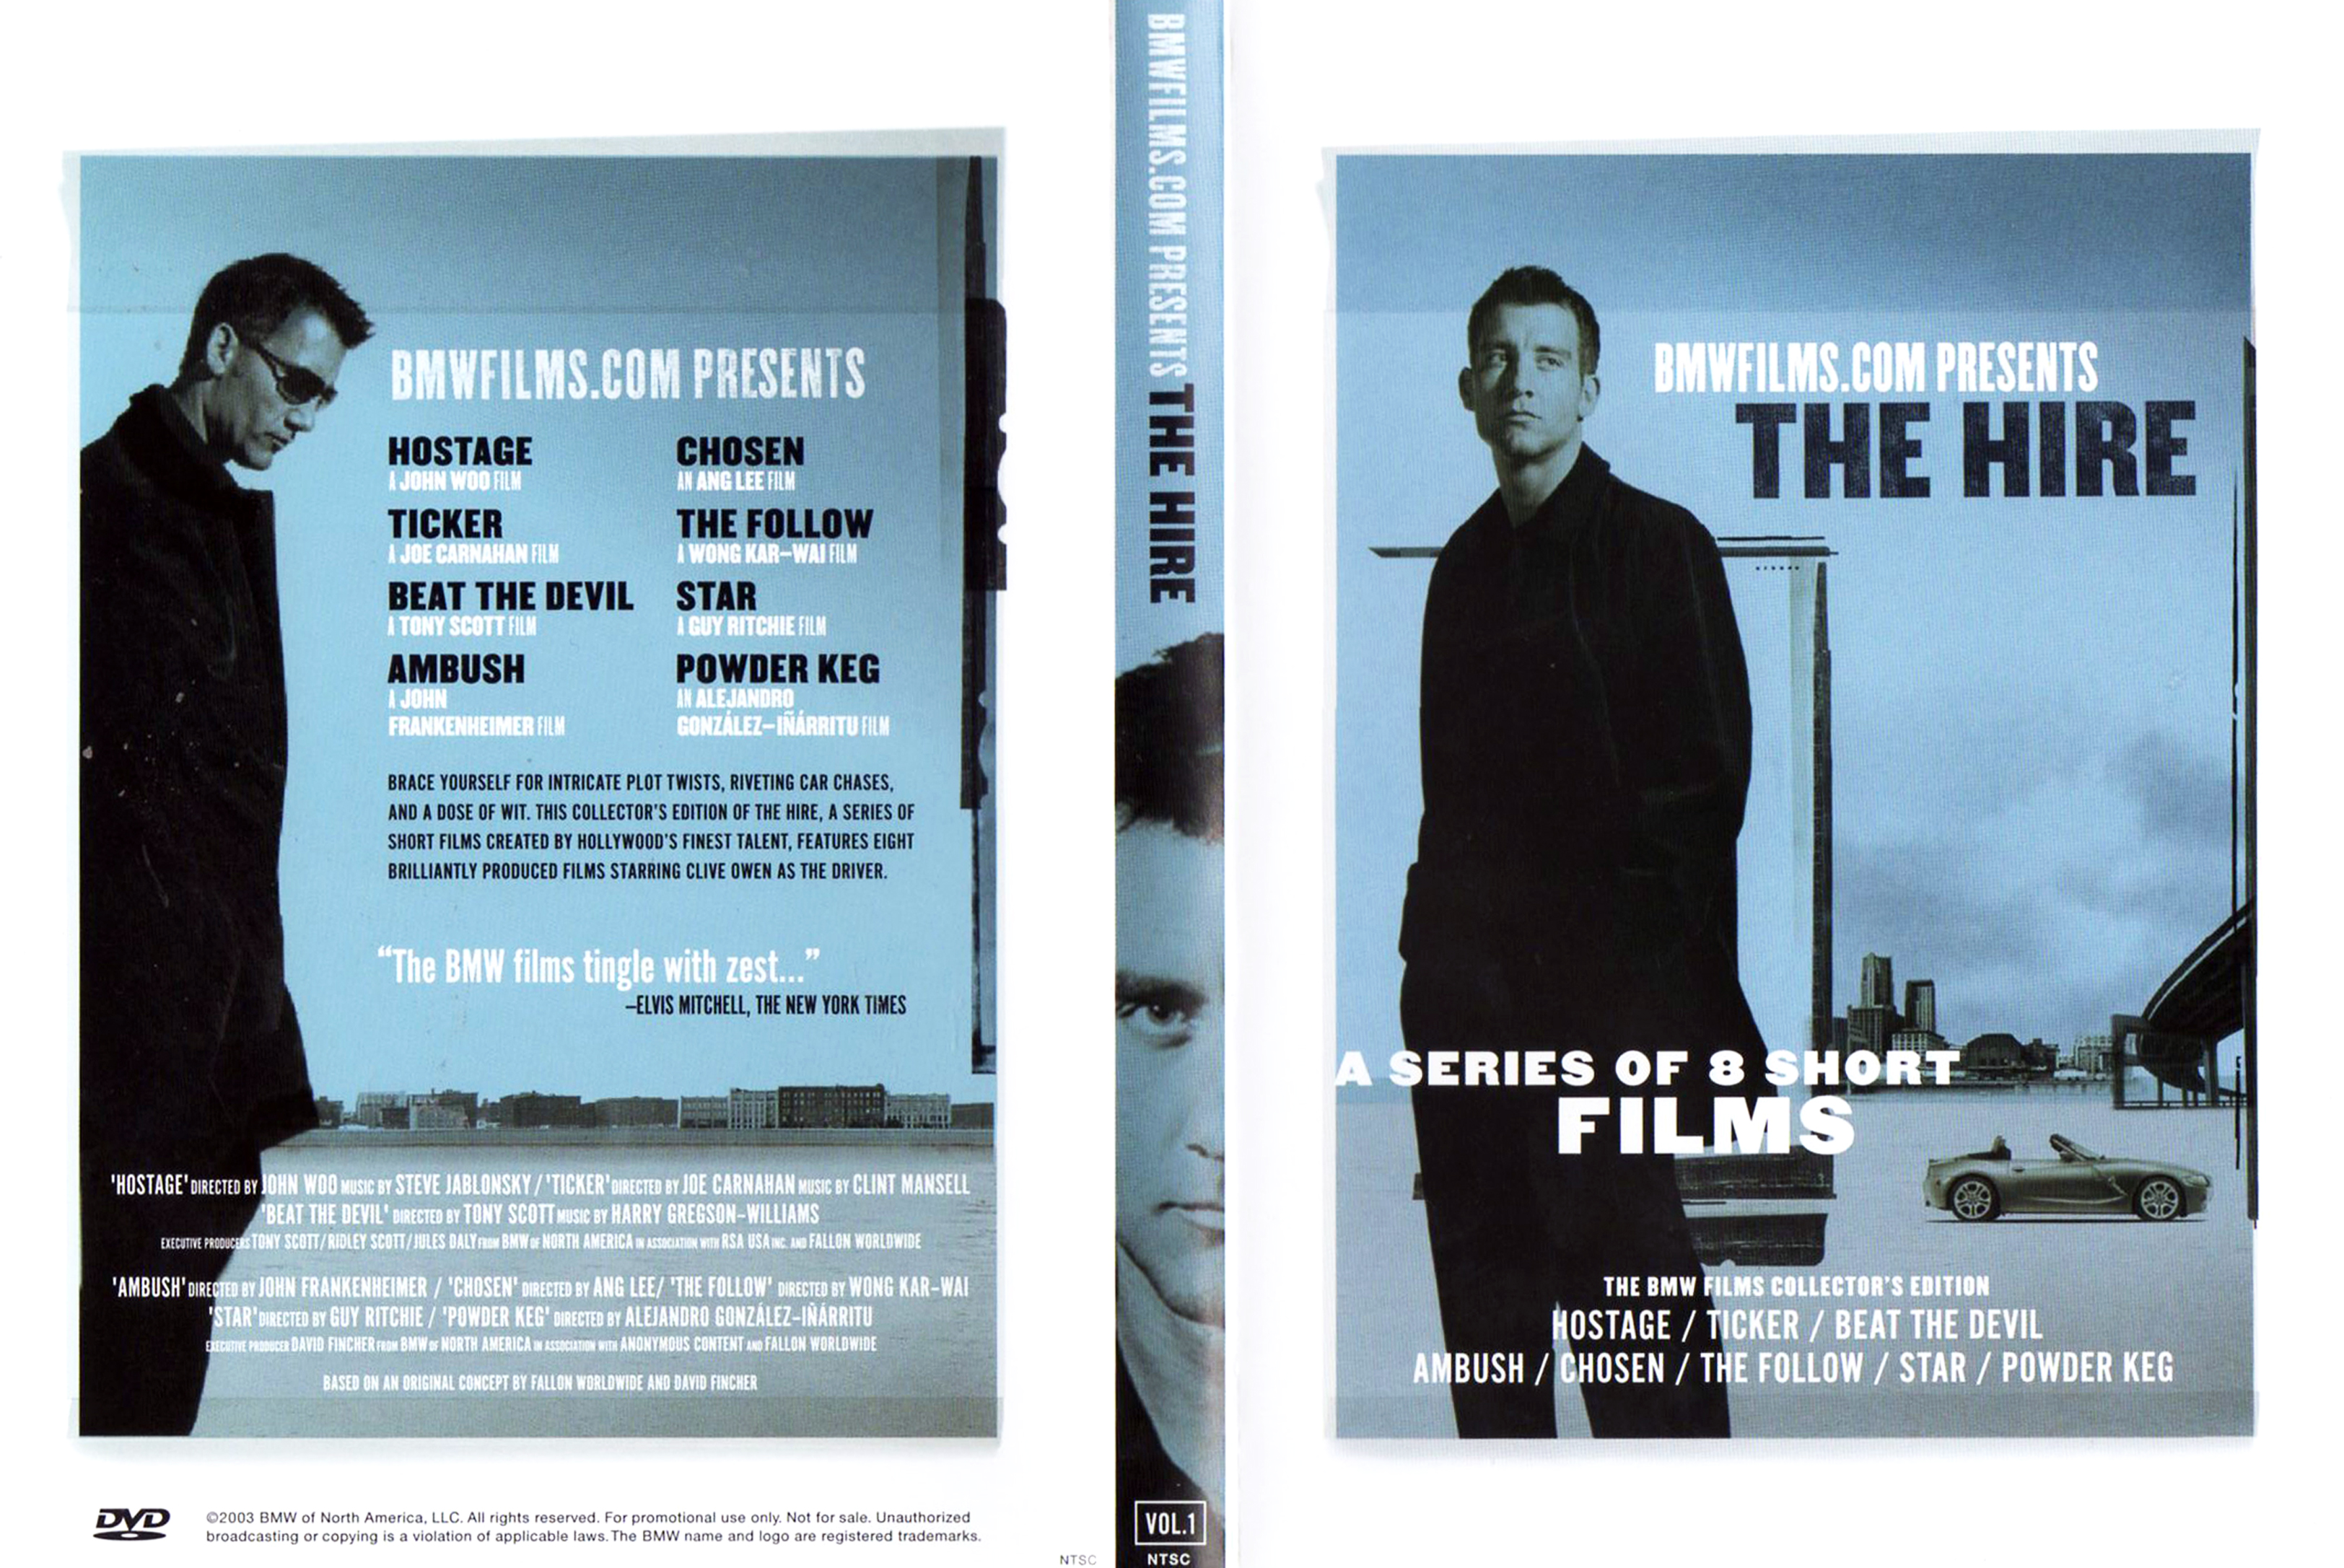 Jaquette DVD Bmwfilms prsents - The Hire Zone 1